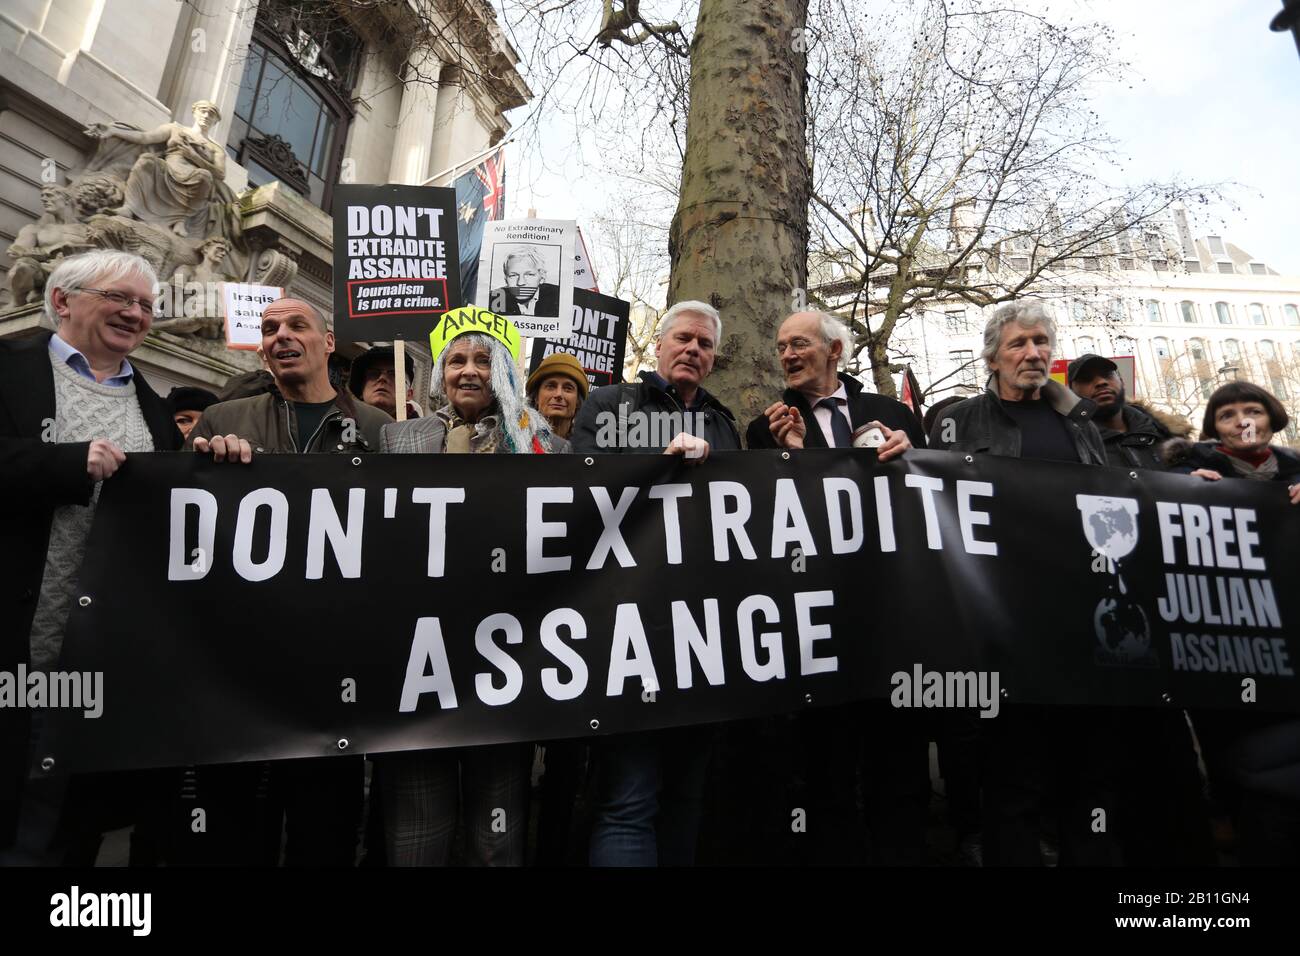 Supporters of Julian Assange, including Yanis Varoufakis (second left), Vivienne Westwood (centre), Assange's father Richard (second right) and Pink Floyd bassist Roger Waters (right), begin a march from Australia House to Parliament Square in London, protesting Assange's imprisonment and extradition. Stock Photo